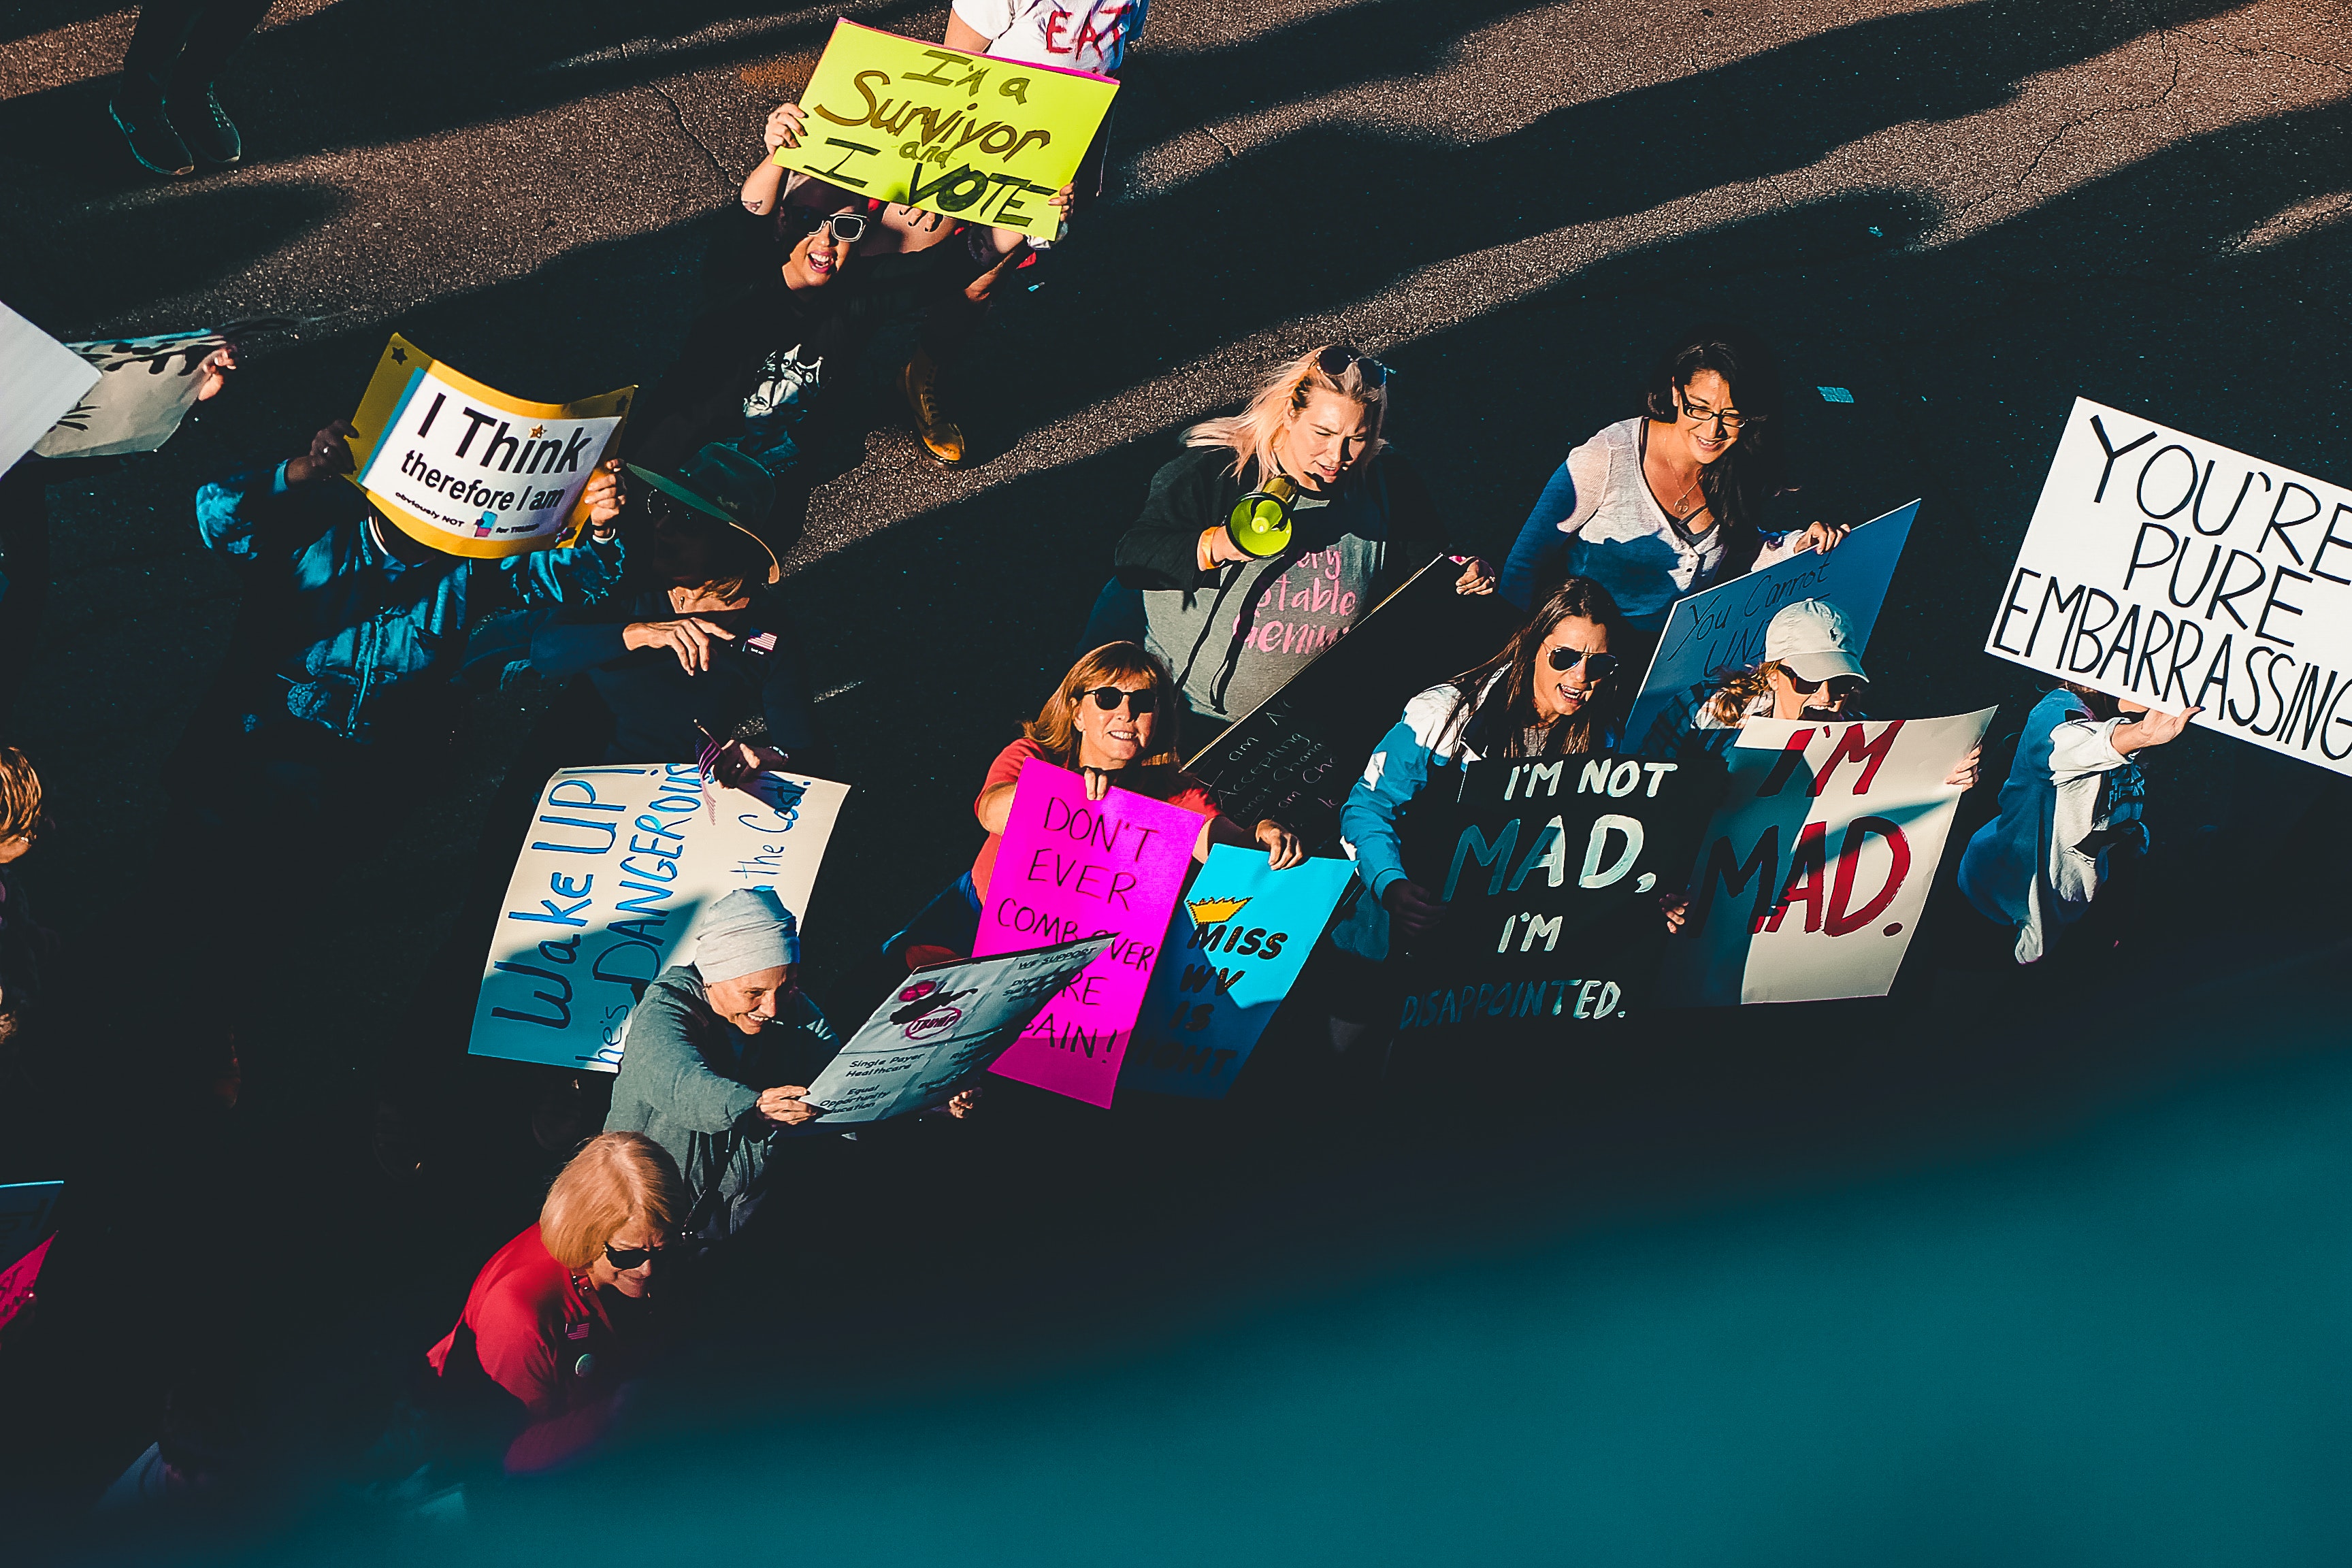 A crowd protesting with signs